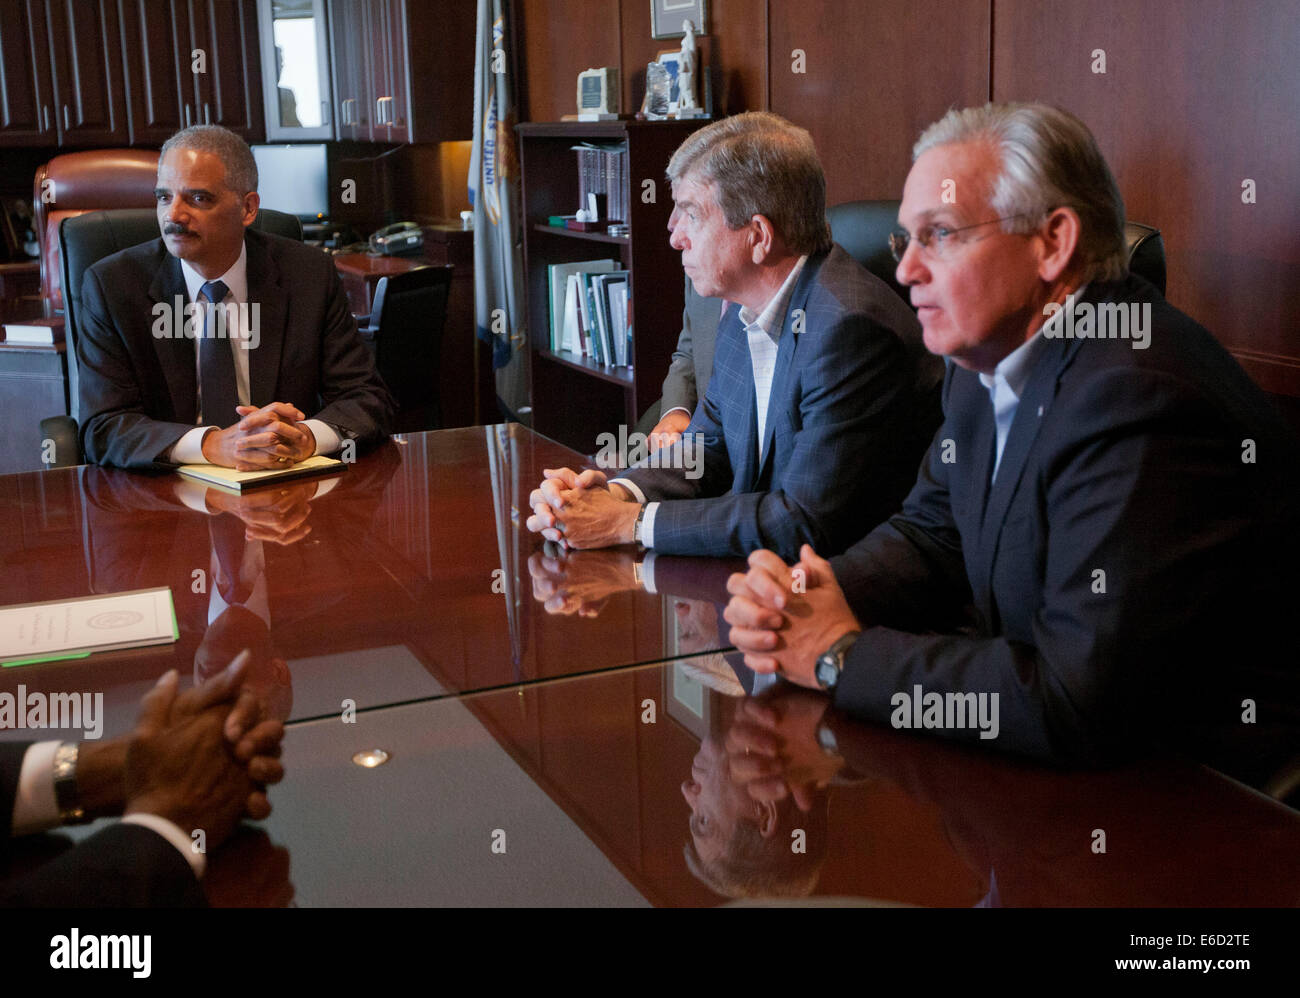 Ferguson, Mo. 20th Aug, 2014. United States Attorney General Eric Holder, left, during his meeting with U.S. Sen. Roy Blunt, R-Mo., center, Missouri Gov. Jay Nixon, right, and other elected officials at the US Attorney's office in St. Louis, Mo., Wednesday, Aug. 20, 2014. Holder traveled to the St. Louis-Area to oversee the federal government's investigation into the shooting of 18-year-old Michael Brown by a police officer on Aug. 9th. Credit:  dpa picture alliance/Alamy Live News Stock Photo